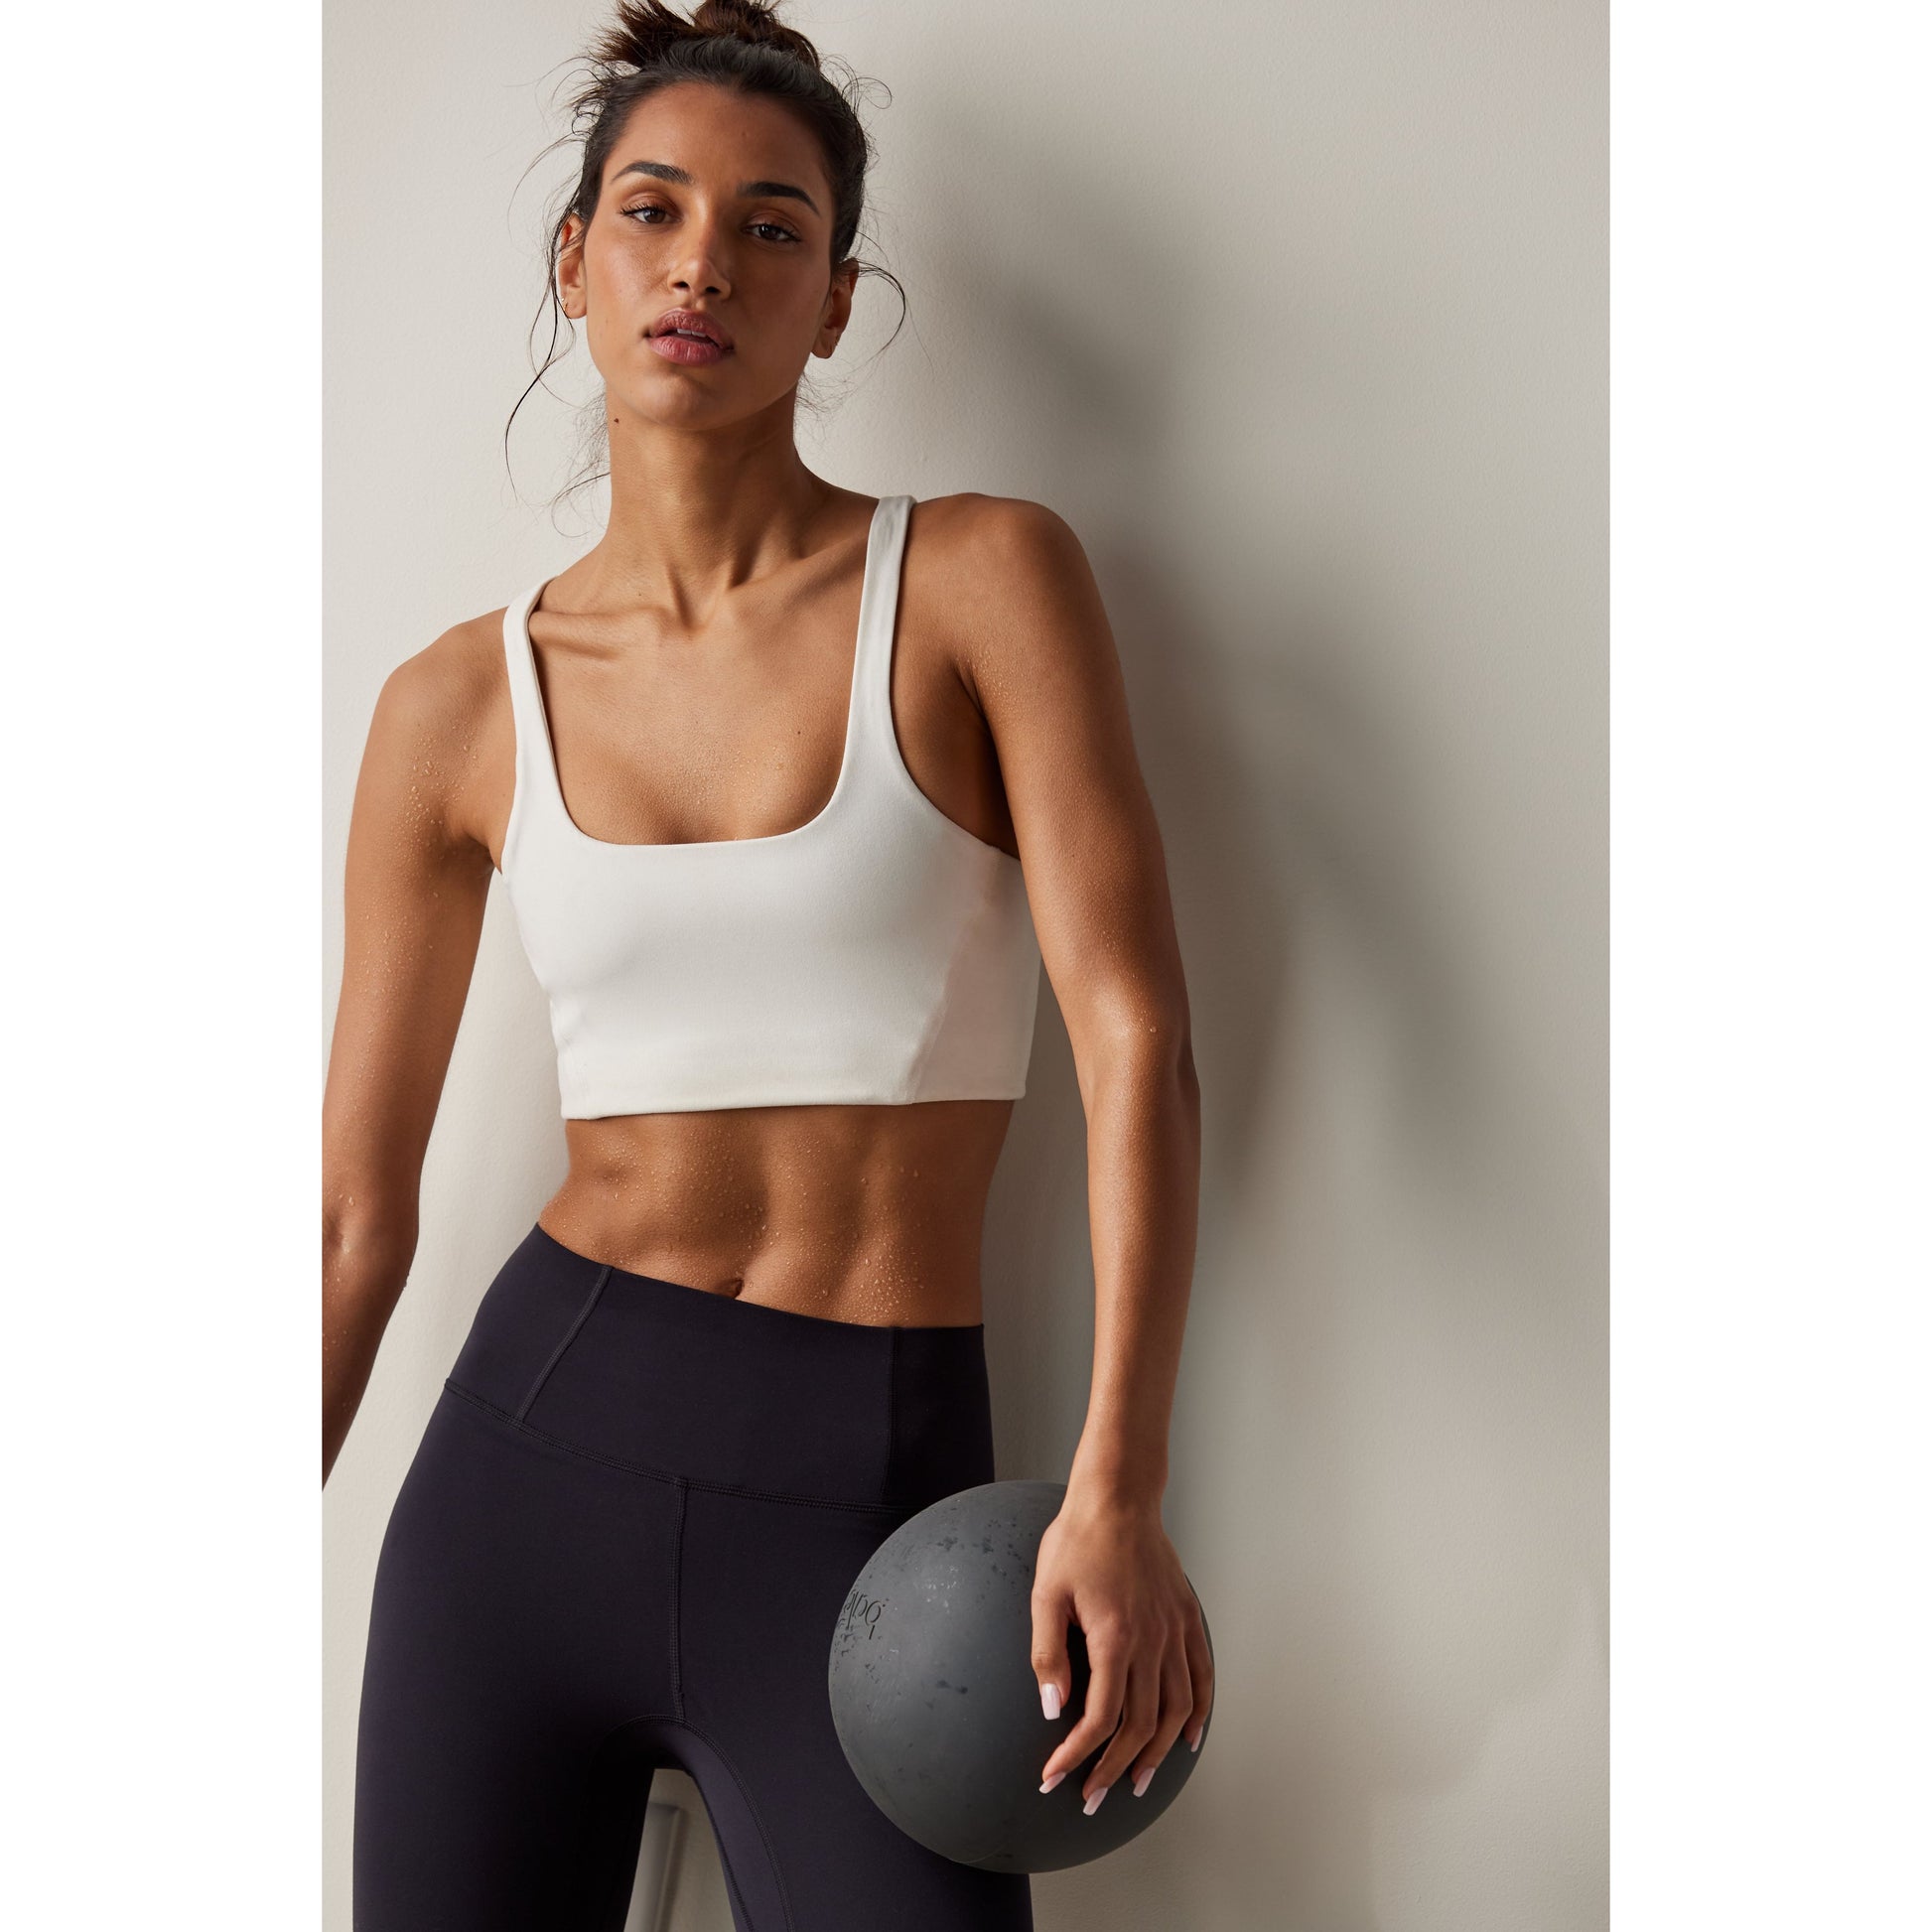 A woman in athletic wear, featuring a Free People Movement Never Better SQ Neck Bra in White with a breathable design, holds a medicine ball against her hip in a neutral-toned studio.